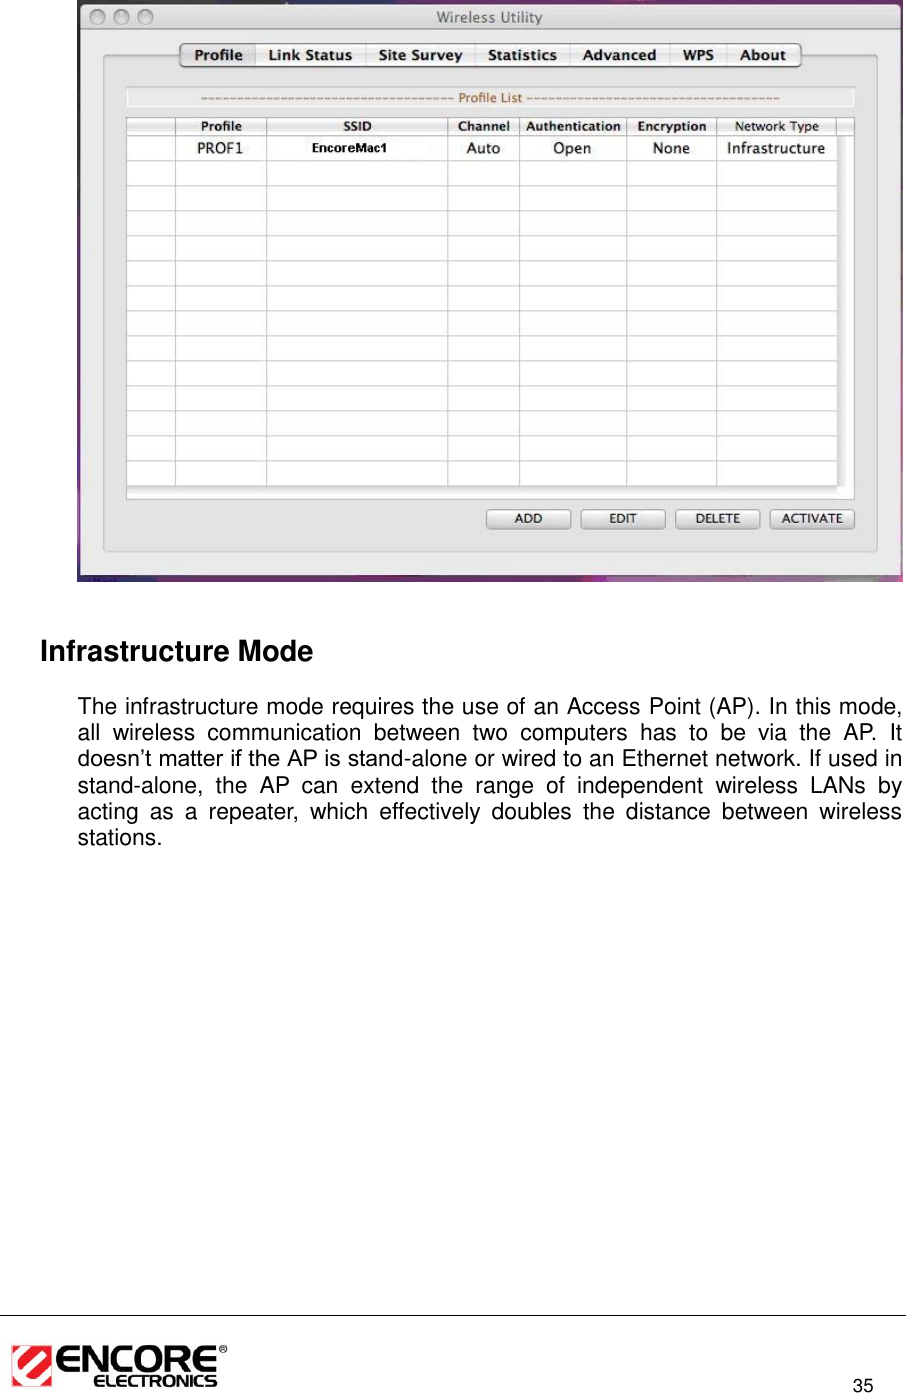                                                                                                                          35       Infrastructure Mode The infrastructure mode requires the use of an Access Point (AP). In this mode, all  wireless  communication  between  two  computers  has  to  be  via  the  AP.  It doesn’t matter if the AP is stand-alone or wired to an Ethernet network. If used in stand-alone,  the  AP  can  extend  the  range  of  independent  wireless  LANs  by acting  as  a  repeater,  which  effectively  doubles  the  distance  between  wireless stations.  